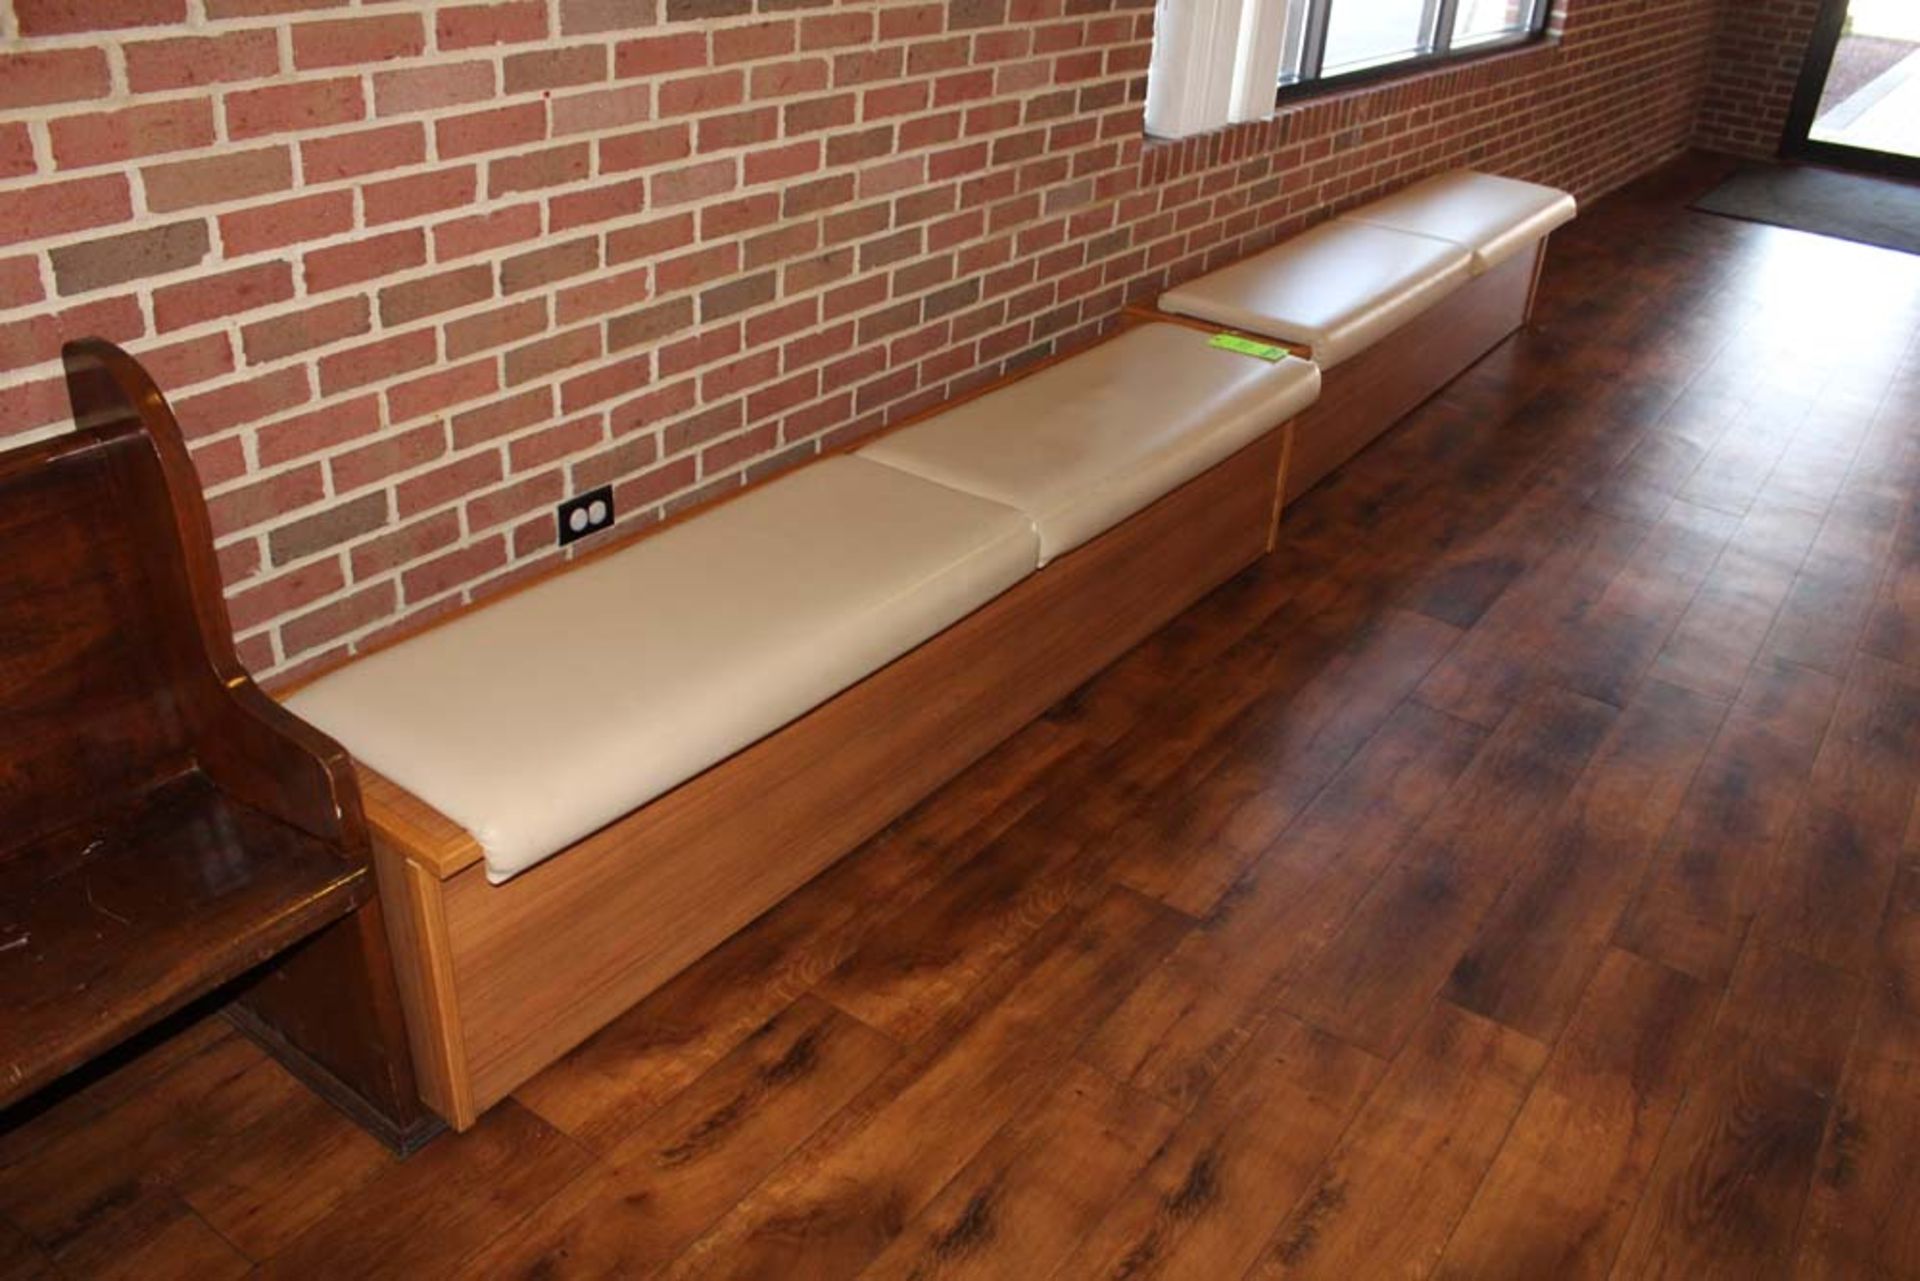 (2) Padded Benches 88"L